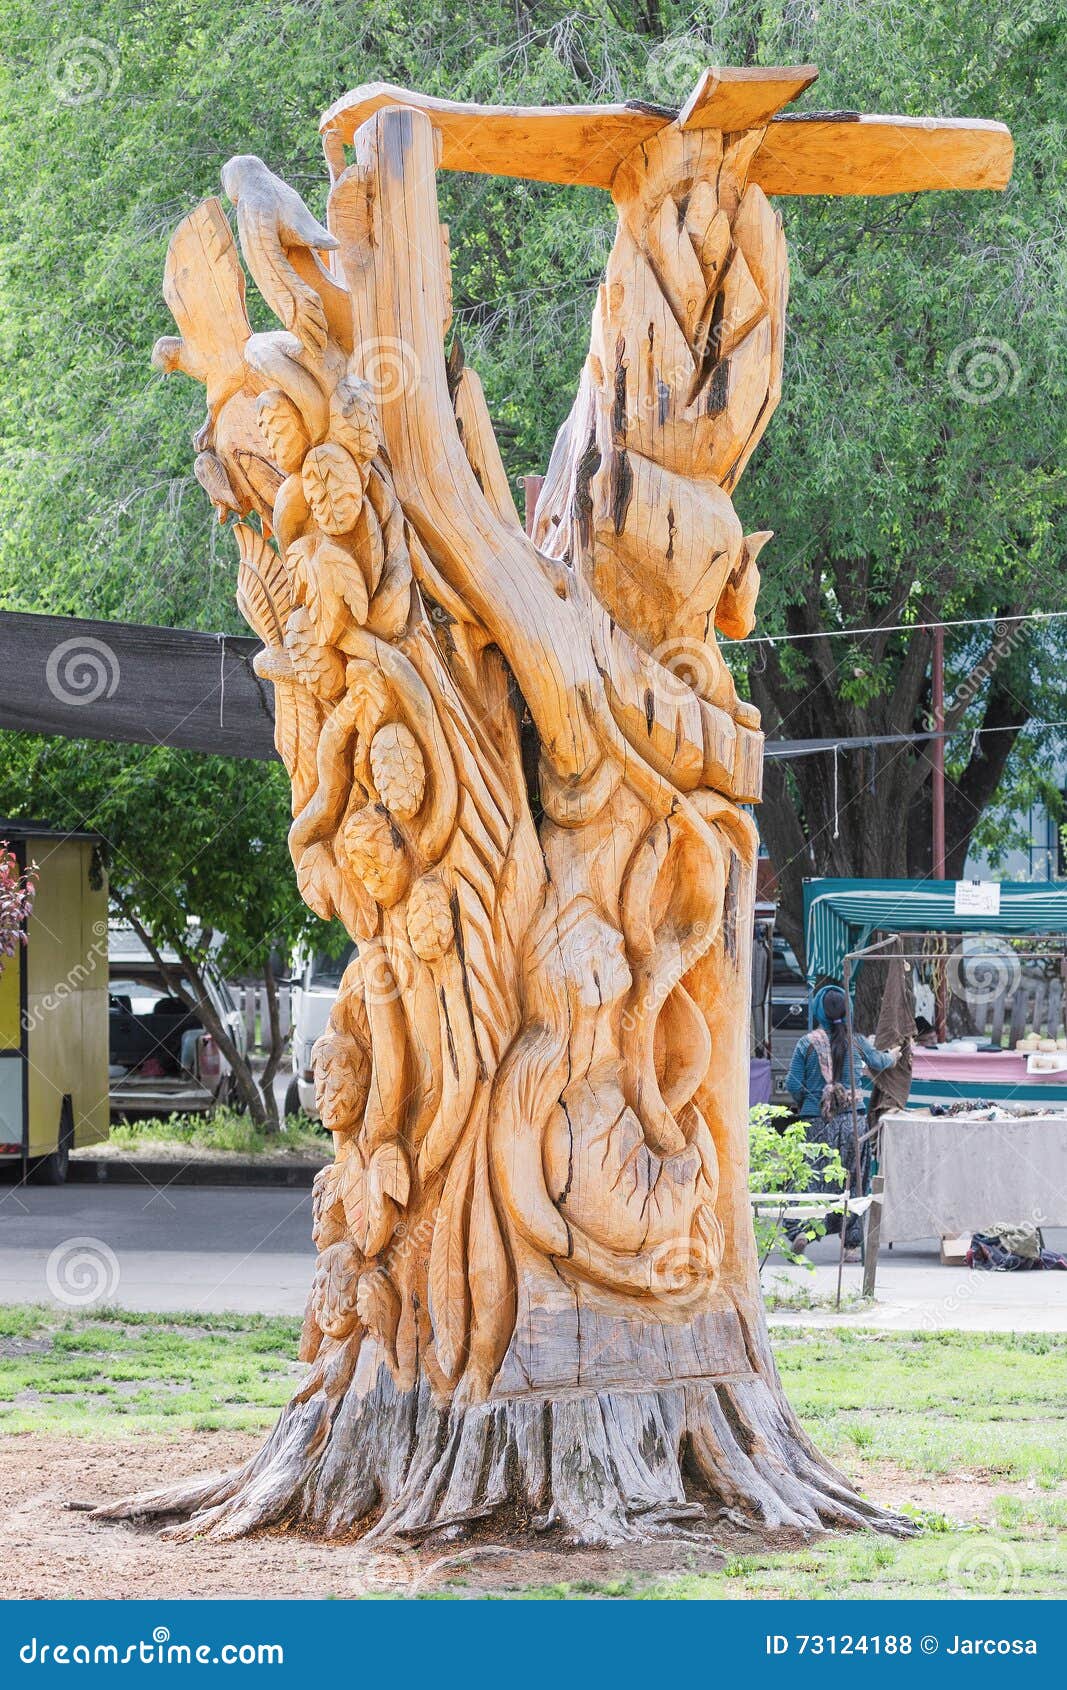 wooden statue located in a public park bolson, argentina